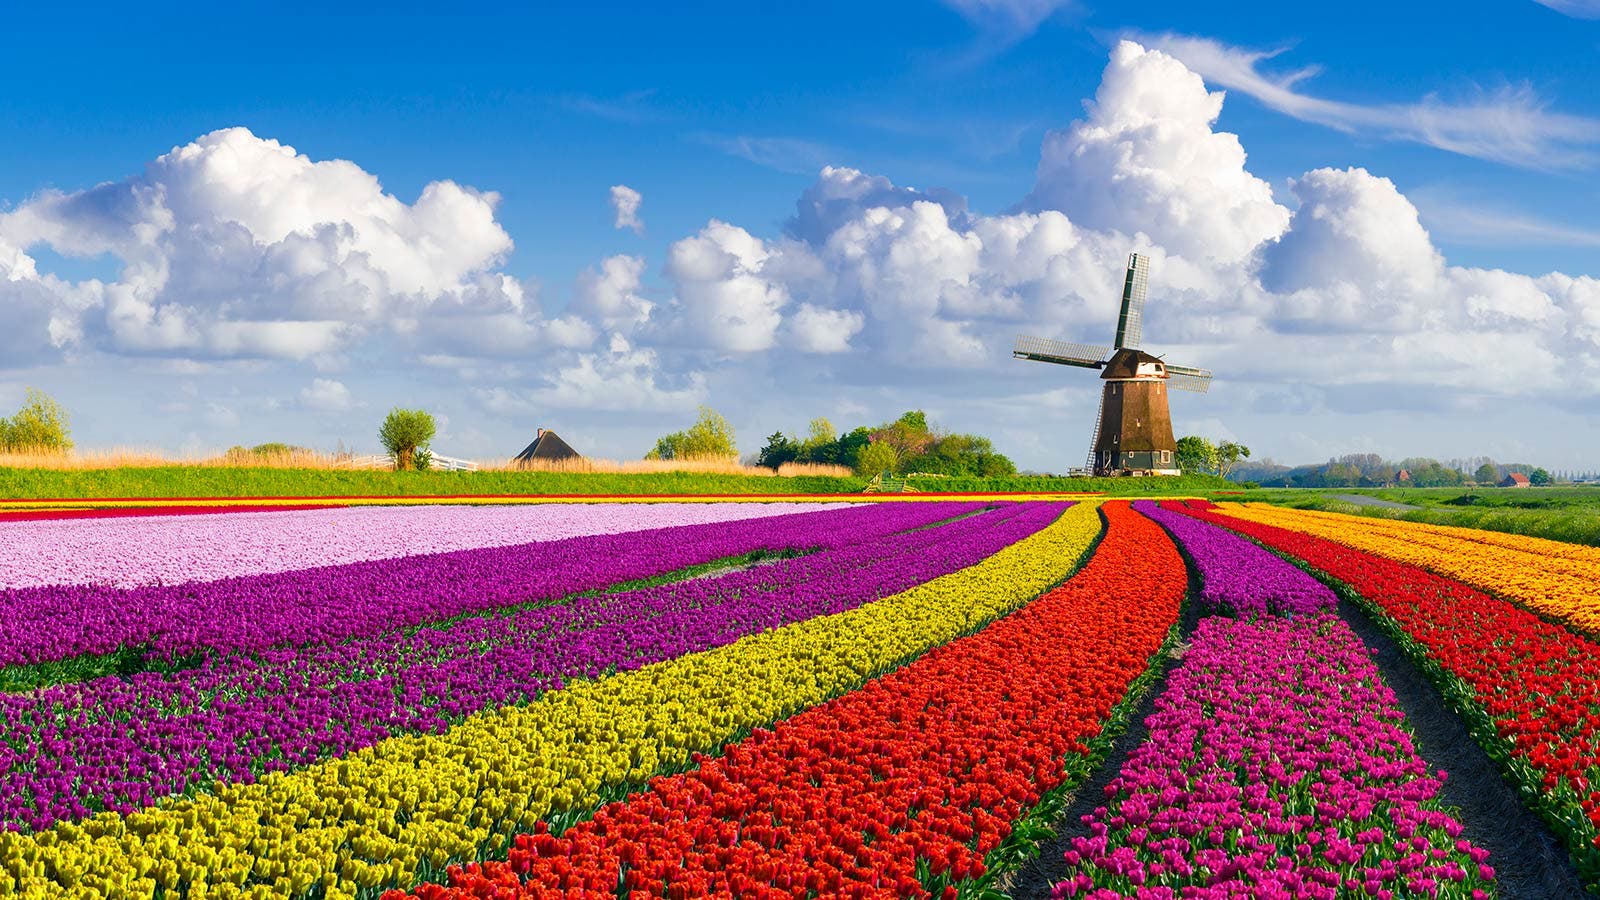 Tulips are grown in huge numbers between April and May